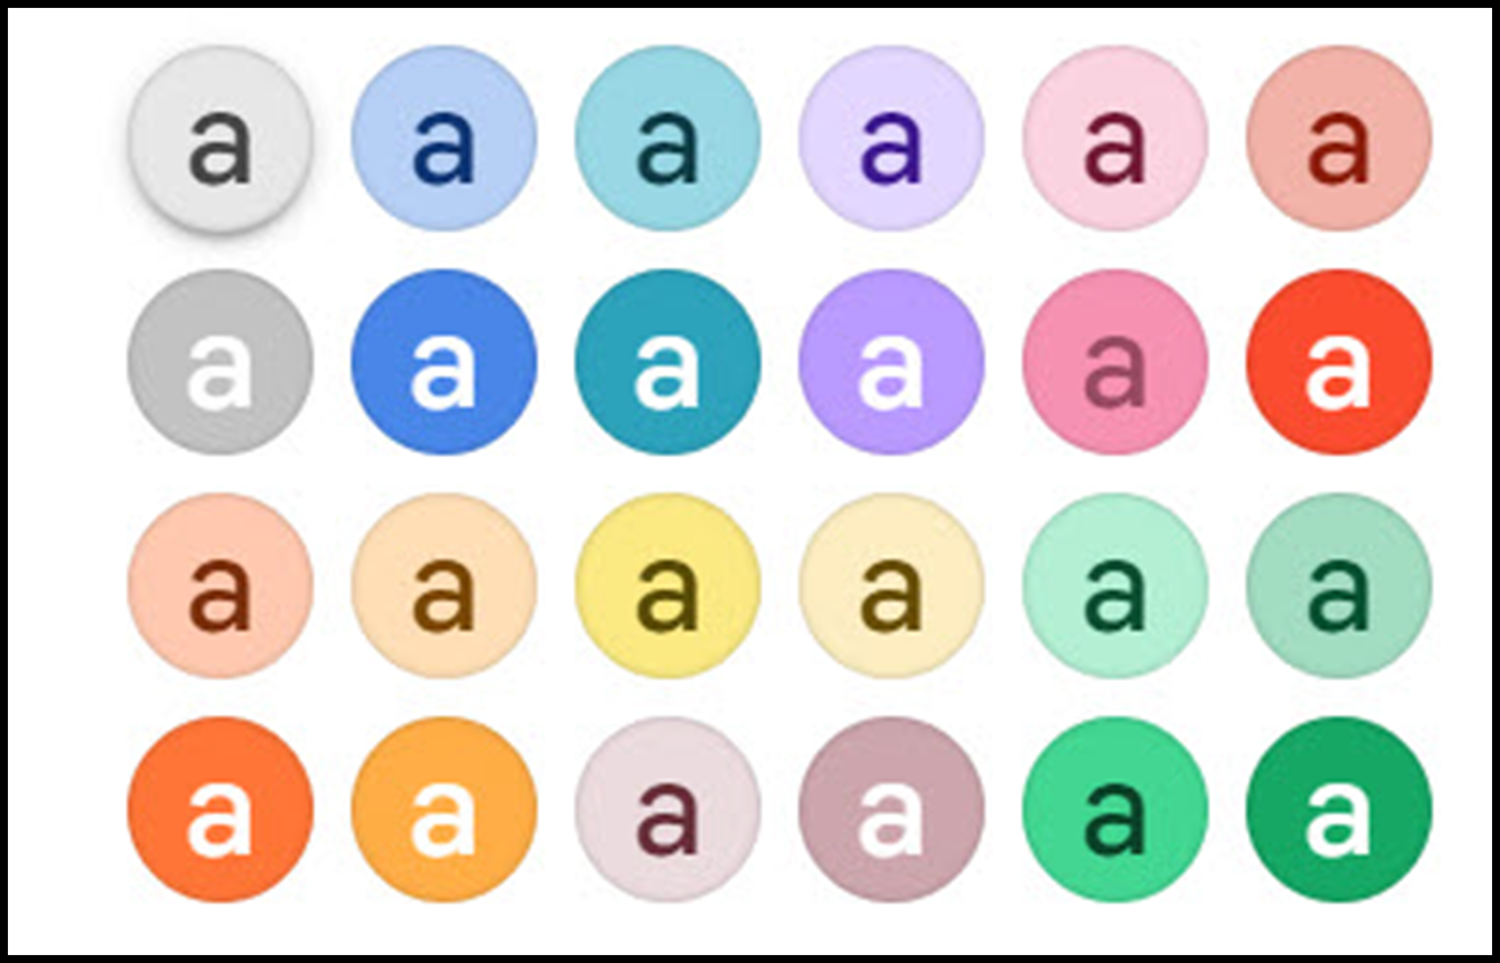 The color palette choices for Gmail labels. There are four rows of six color circles, 24 total. Each color circle contains a lower case letter 'a' to show how text will look visually with that background.